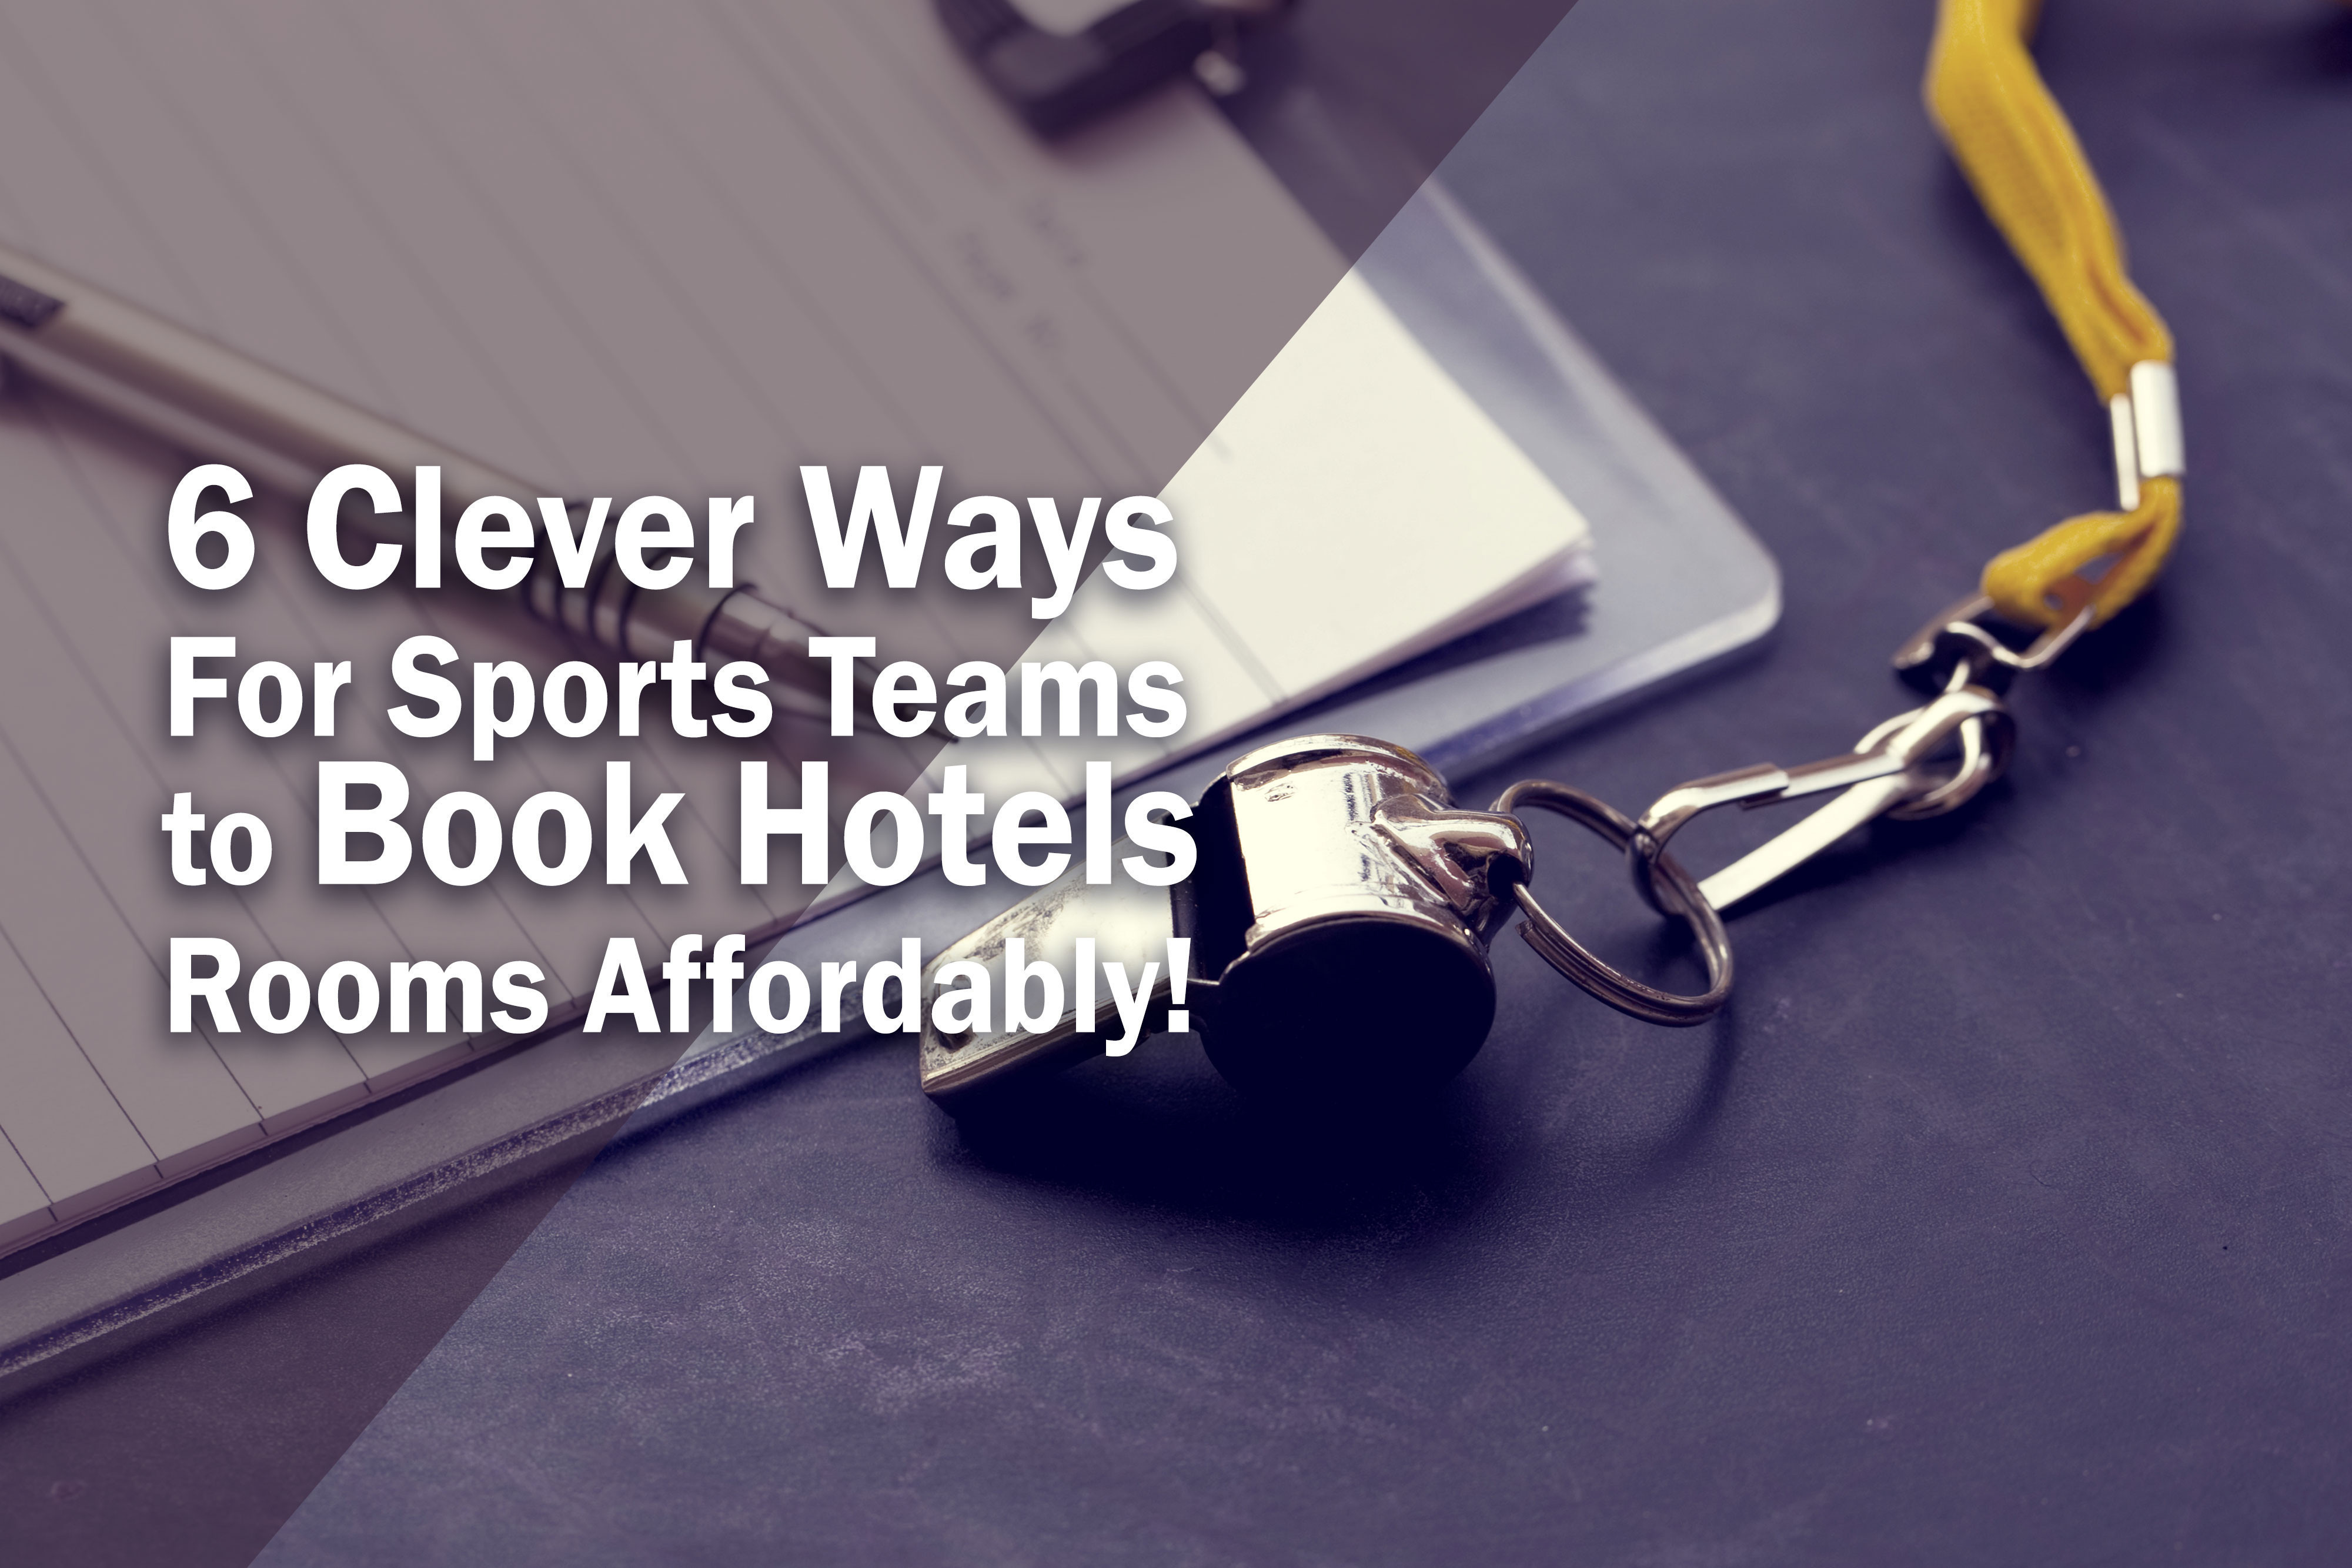 6 Clever Ways For Sports Teams to Book Hotels Rooms Affordably!